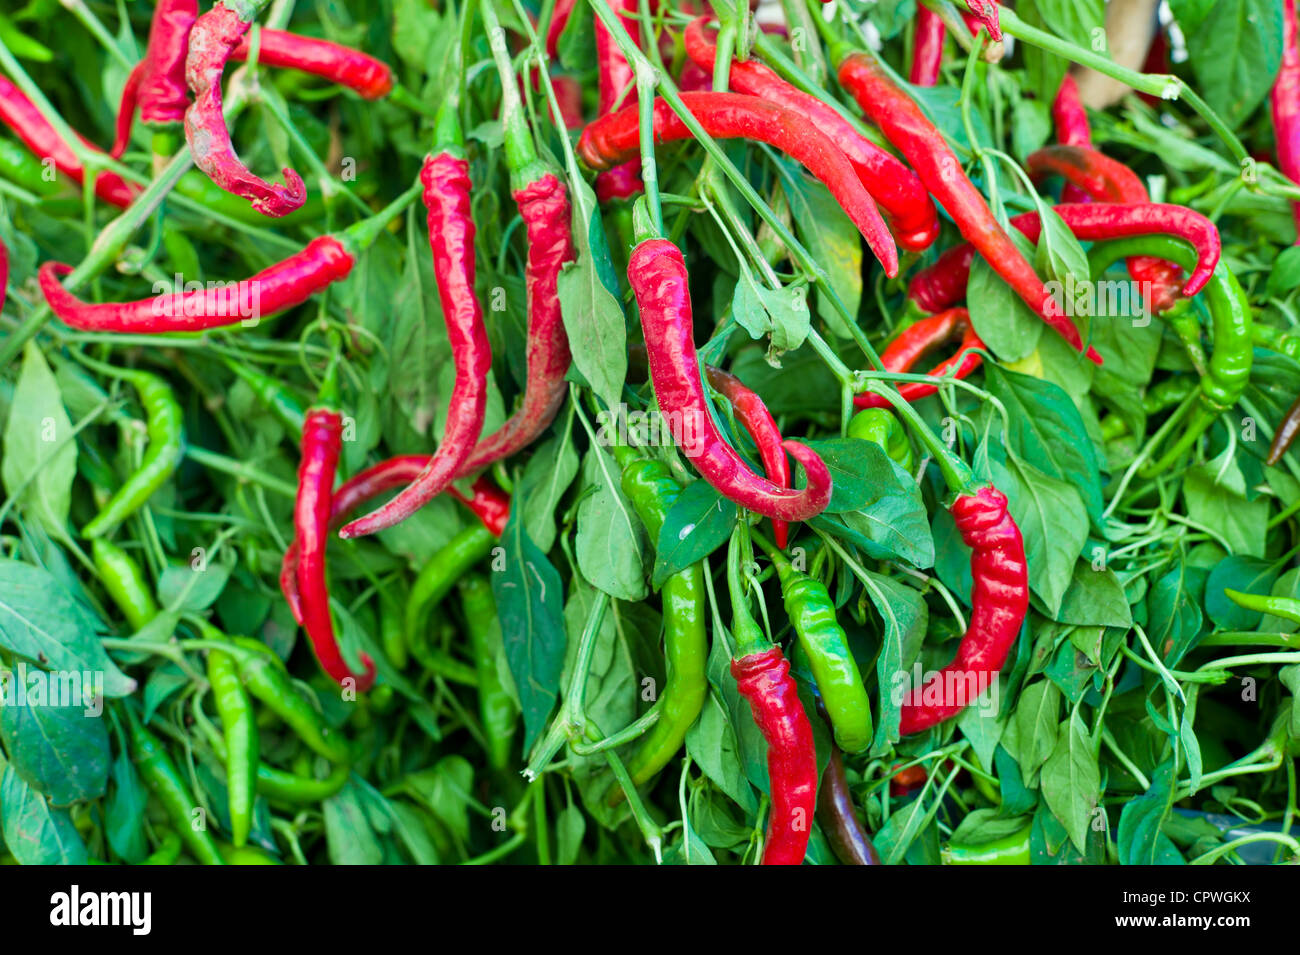 Red and green chili peppers, Capsicum pubescens, on sale in food market in Pienza, Tuscany, Italy Stock Photo